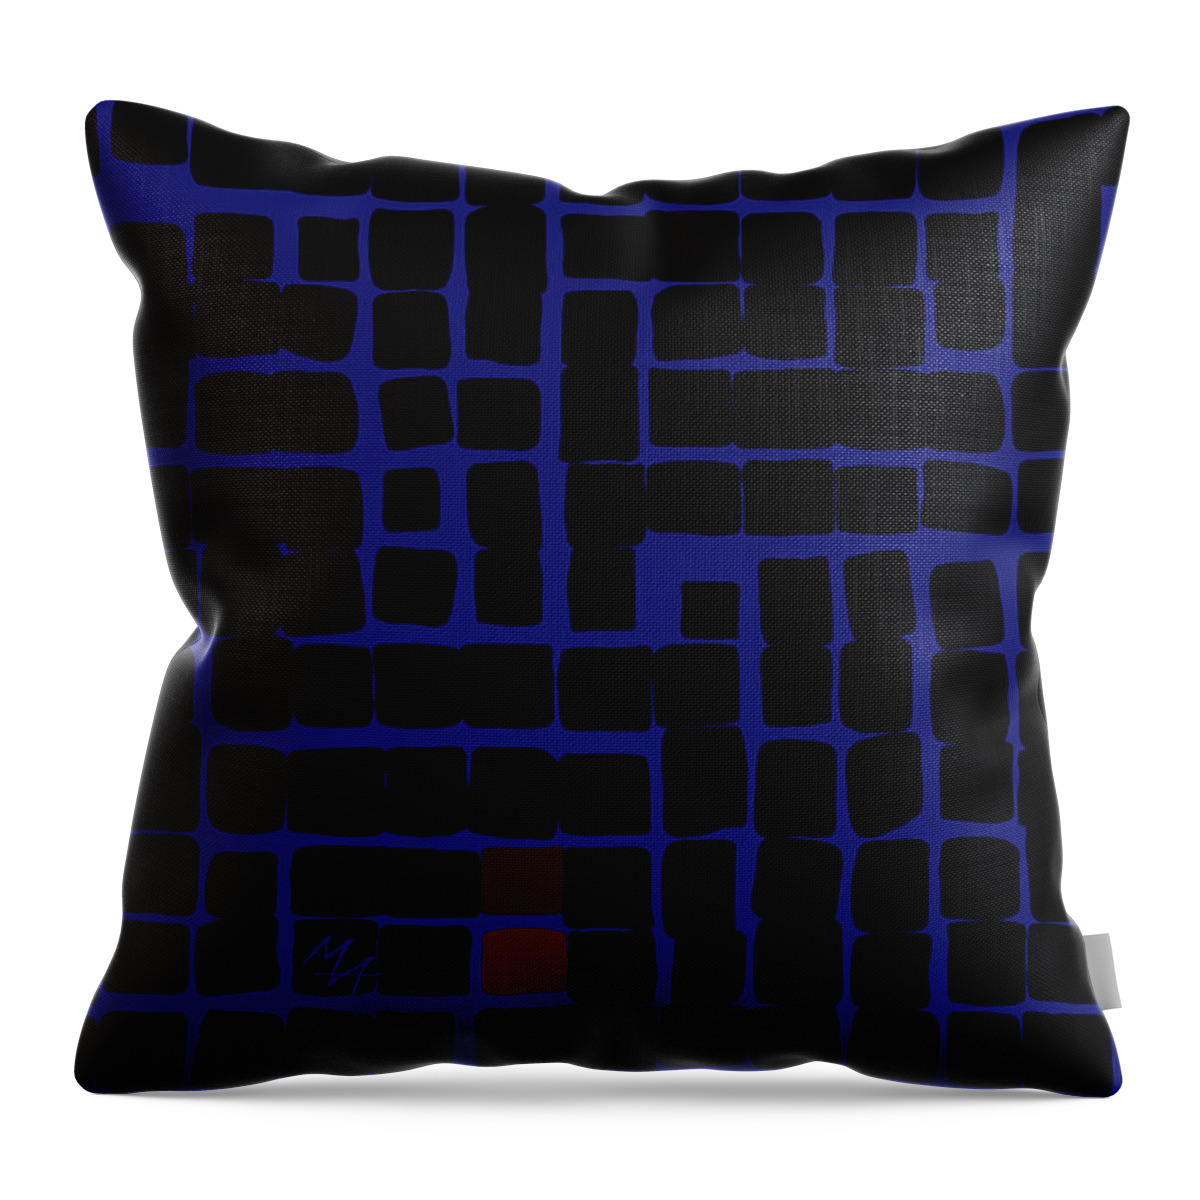 Industrial Night Throw Pillow featuring the digital art Industrial Night by Attila Meszlenyi